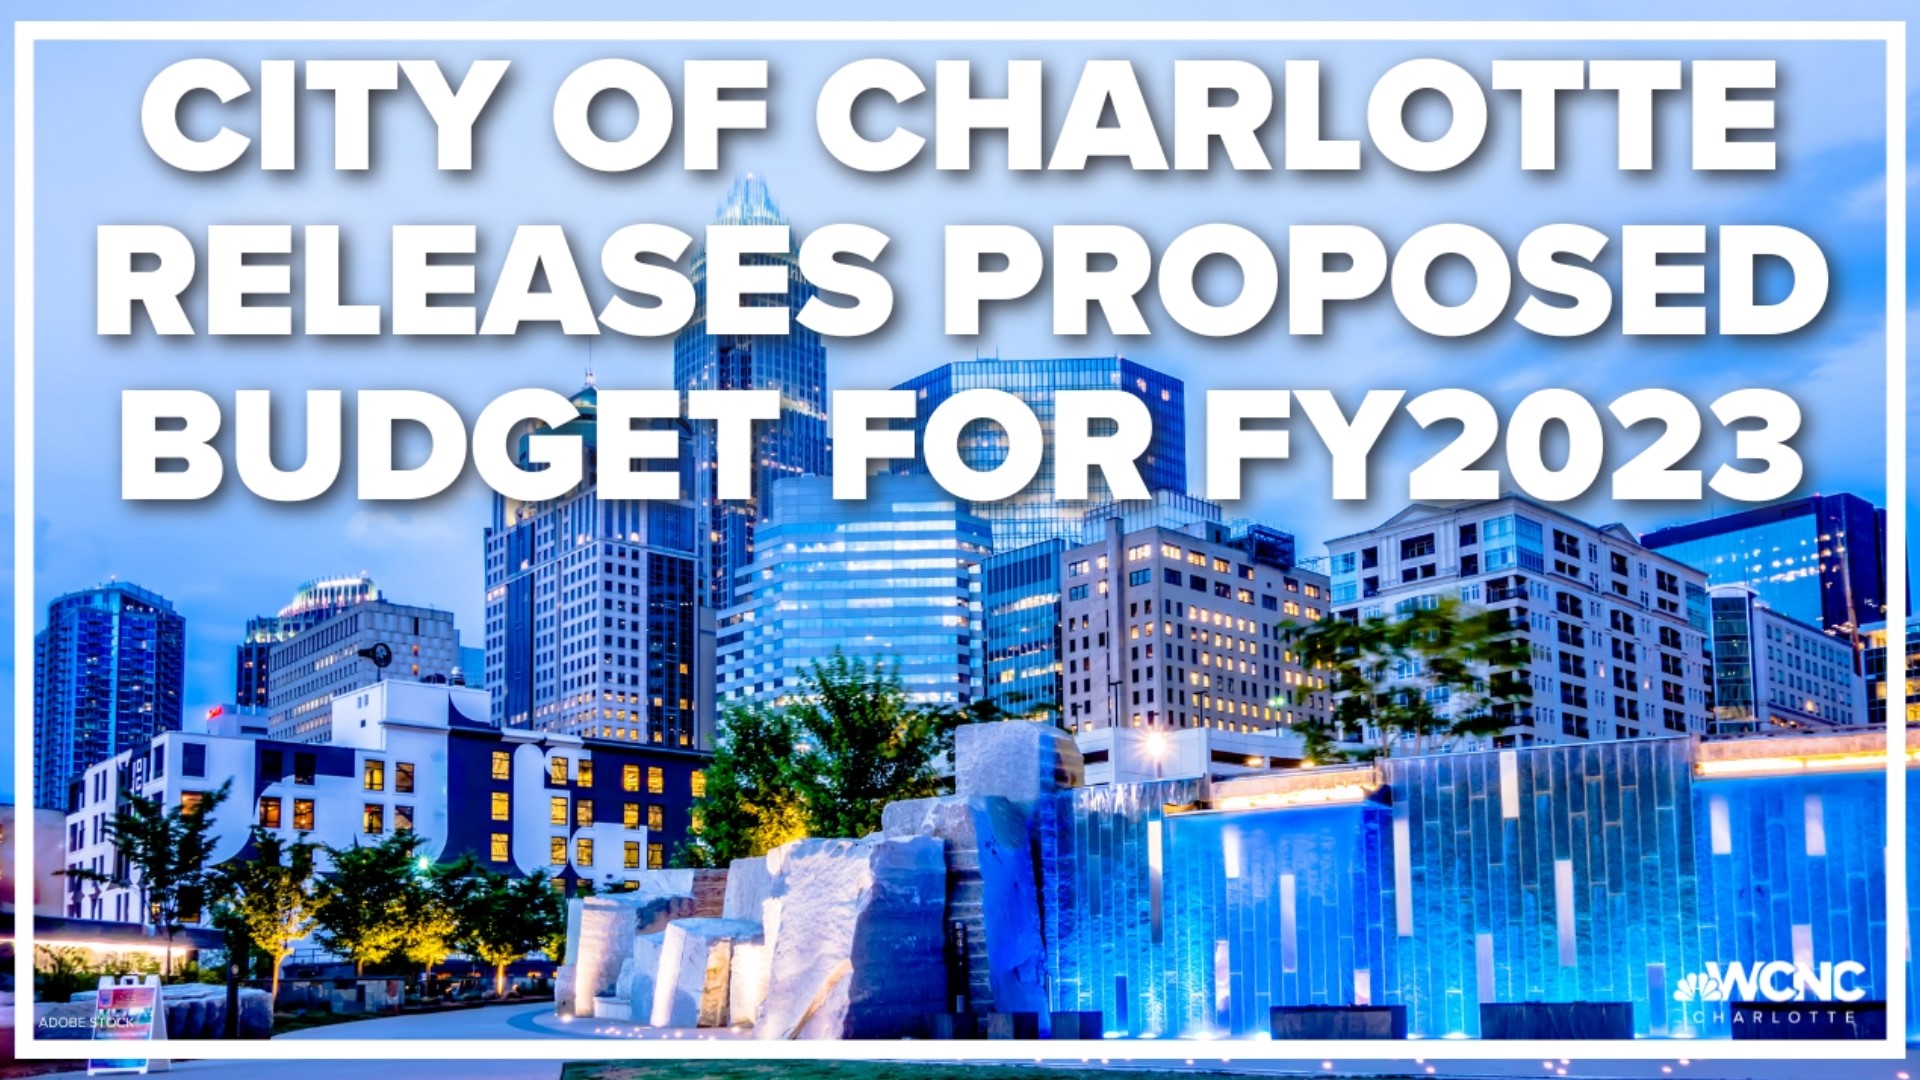 As part of the $3.24 billion proposed budget, city leaders said there would be no tax increases and no layoffs or furloughs for city employees.